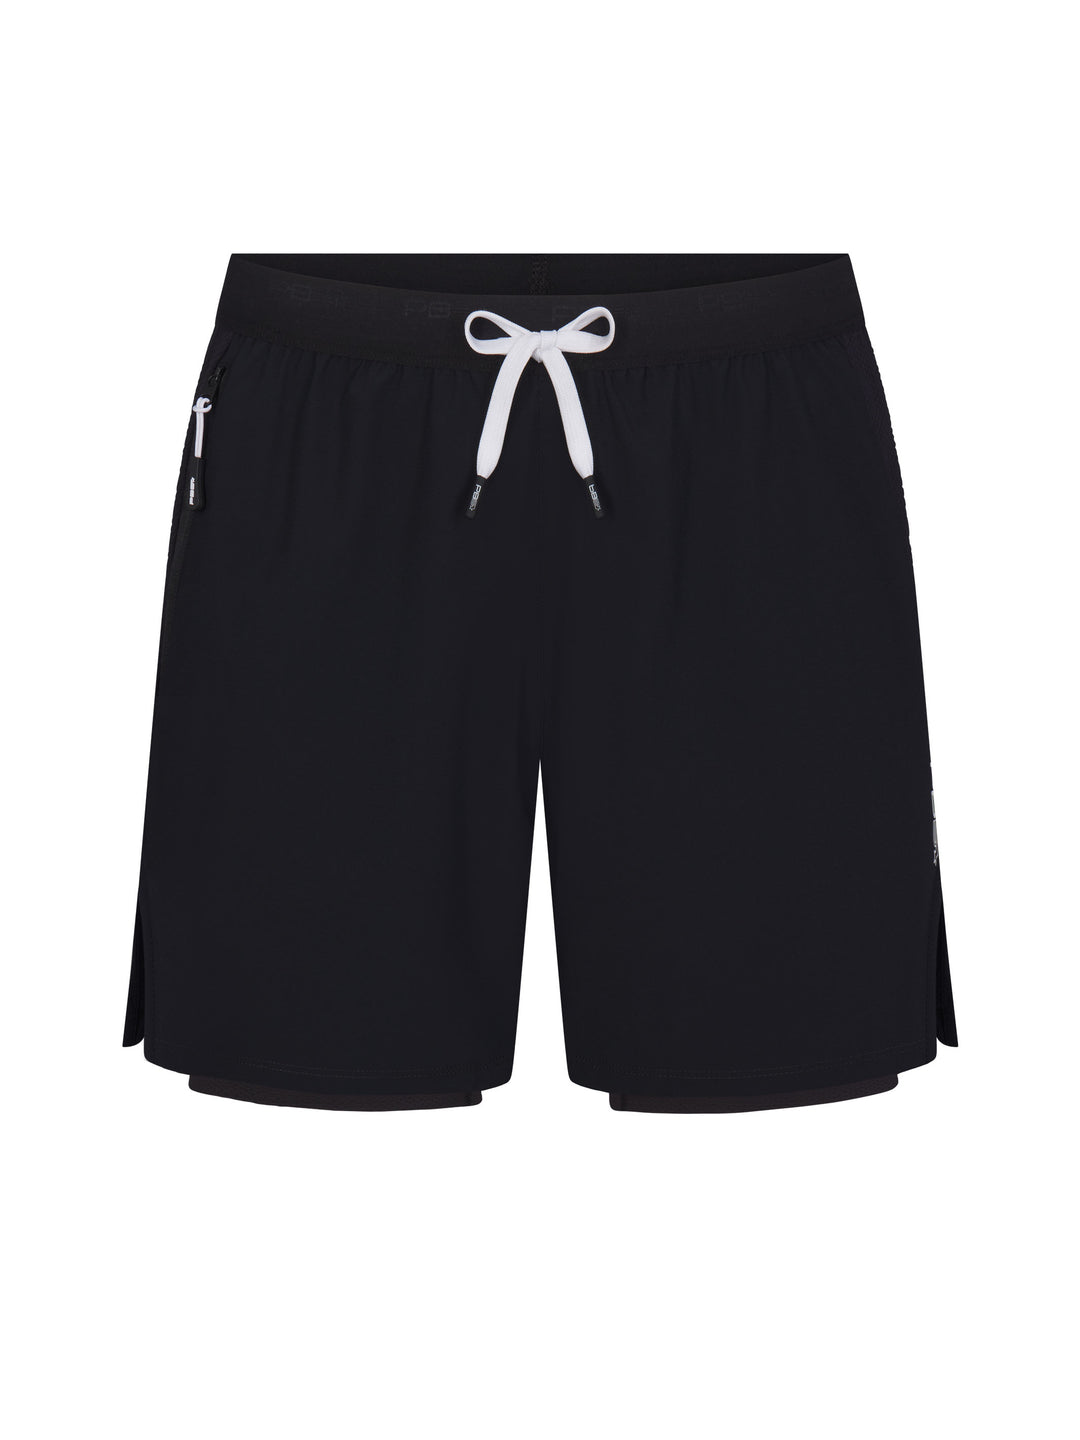 Men's Signature Court Short in black with white drawstring.